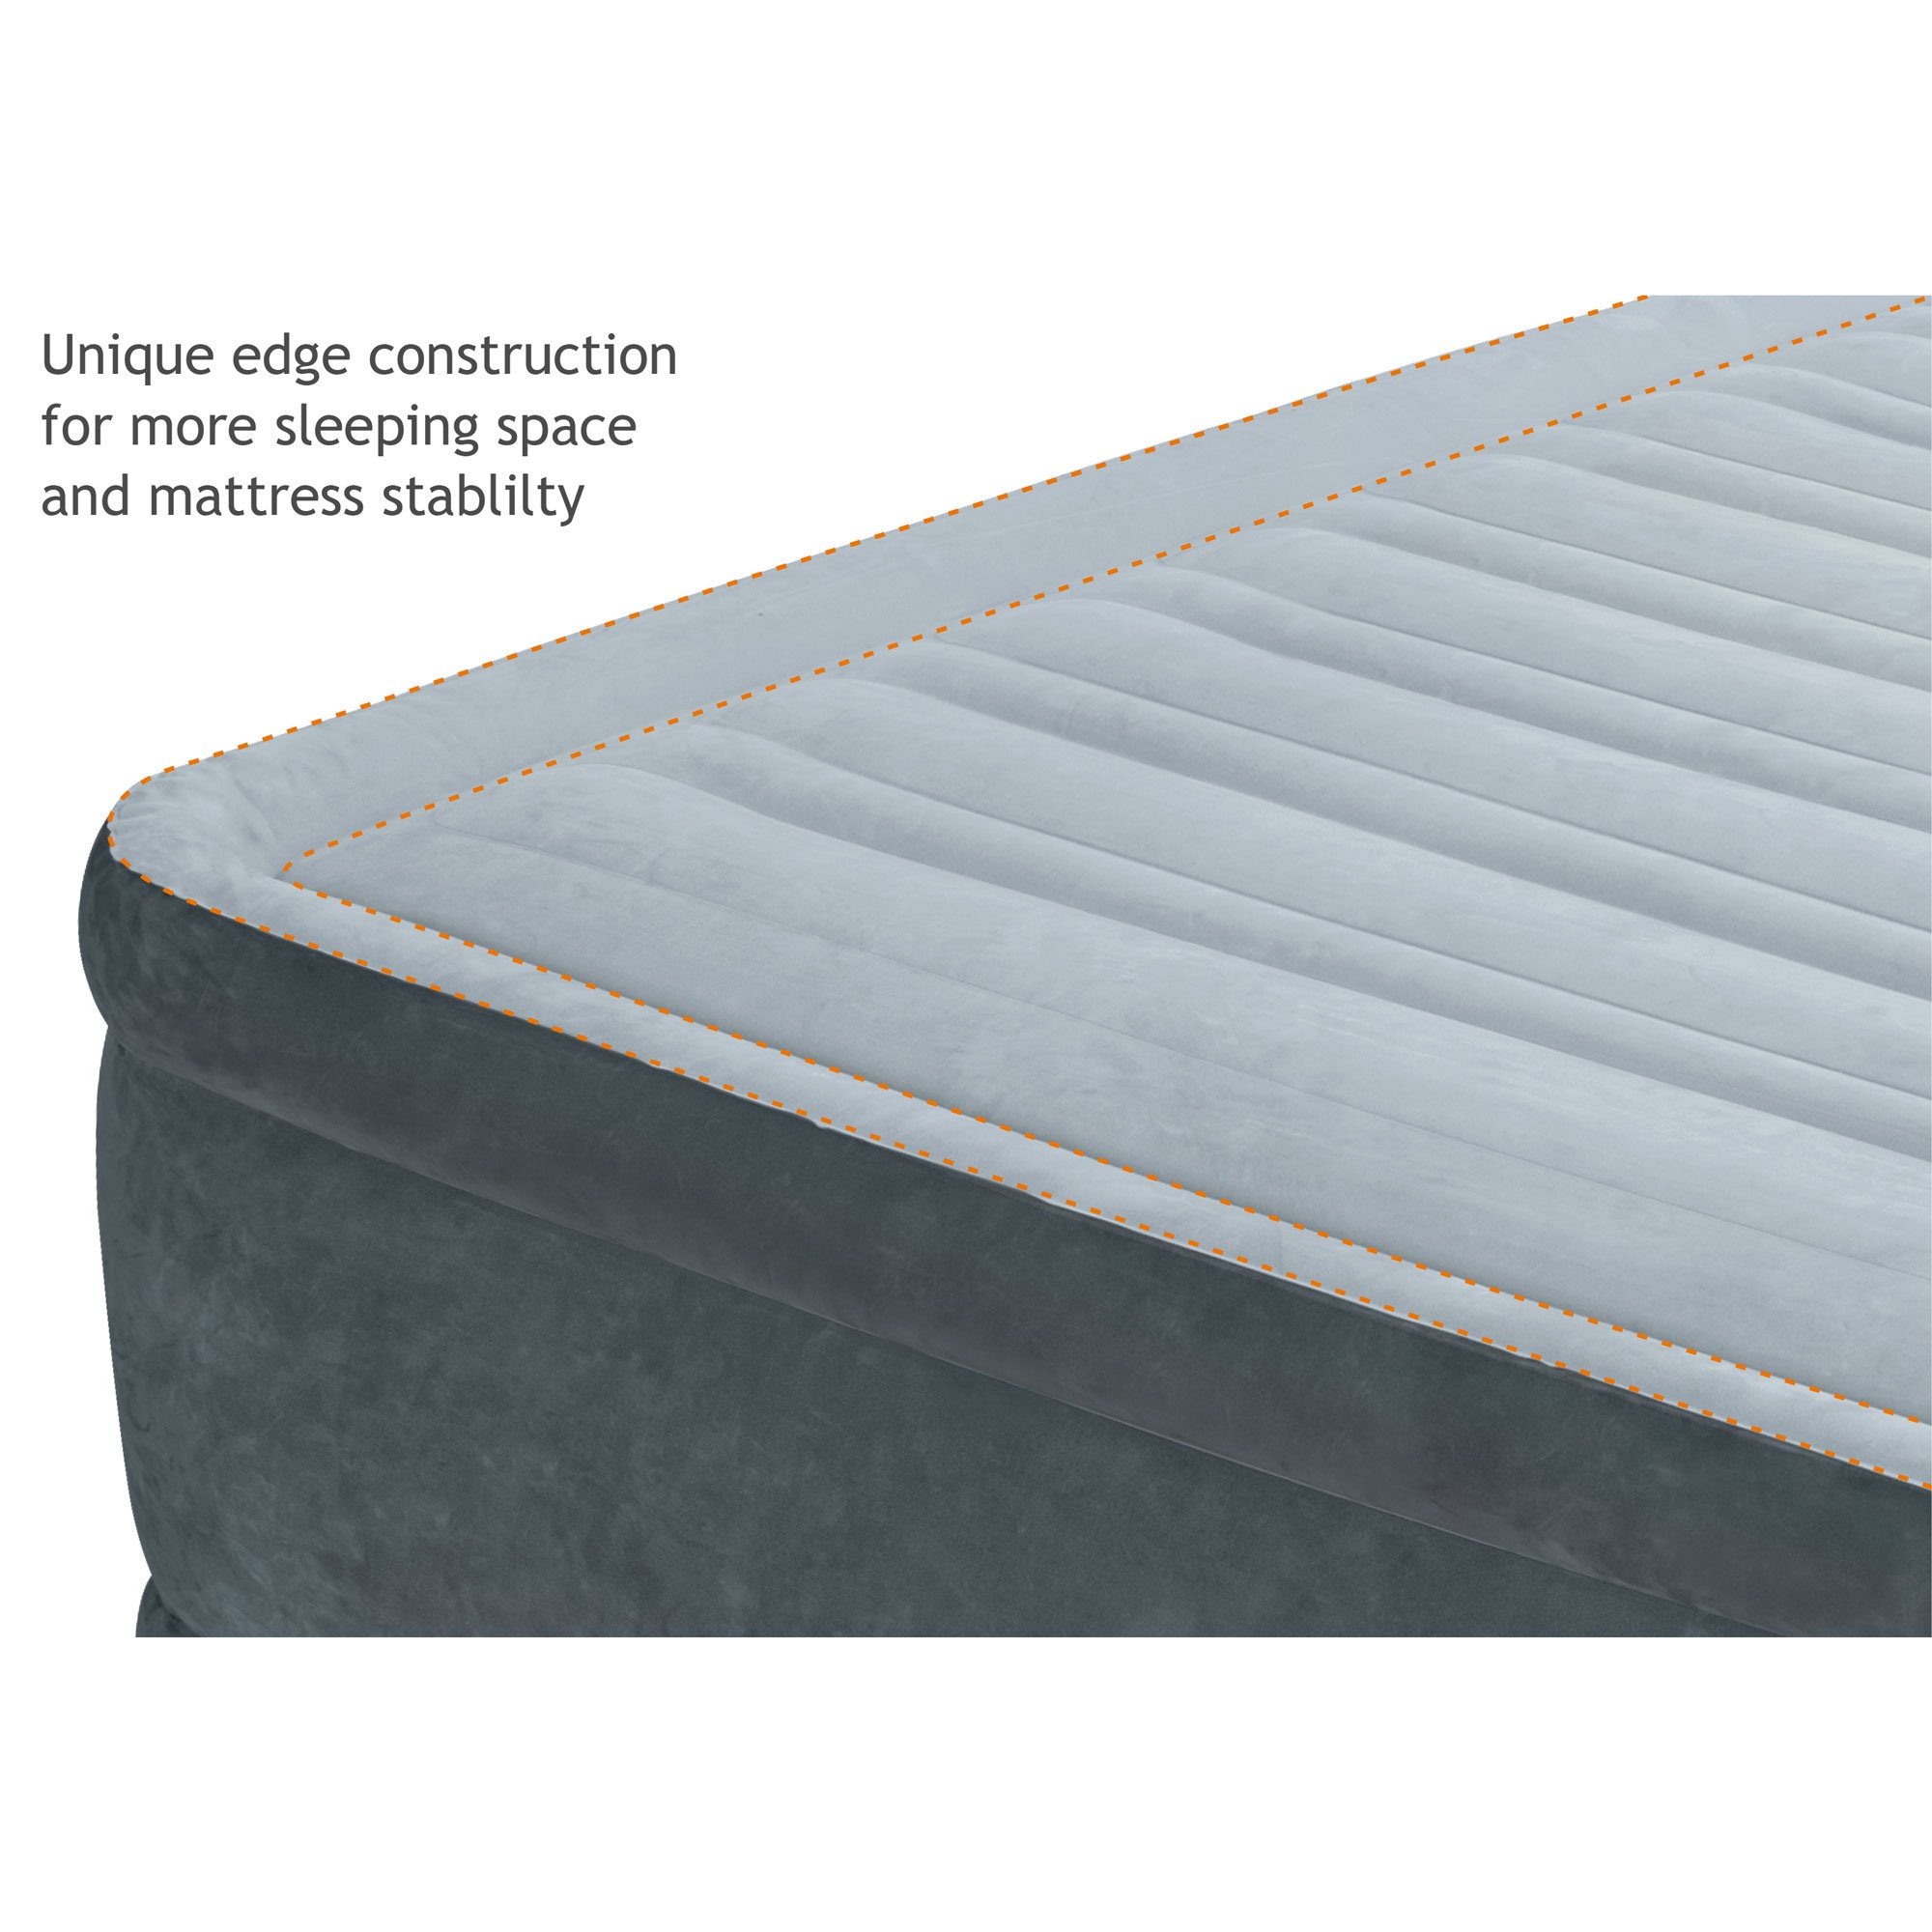 Intex Twin 13" Intex Dura Beam Plus Series Mid Rise Airbed Mattress with Built In Electric Pump - image 5 of 9